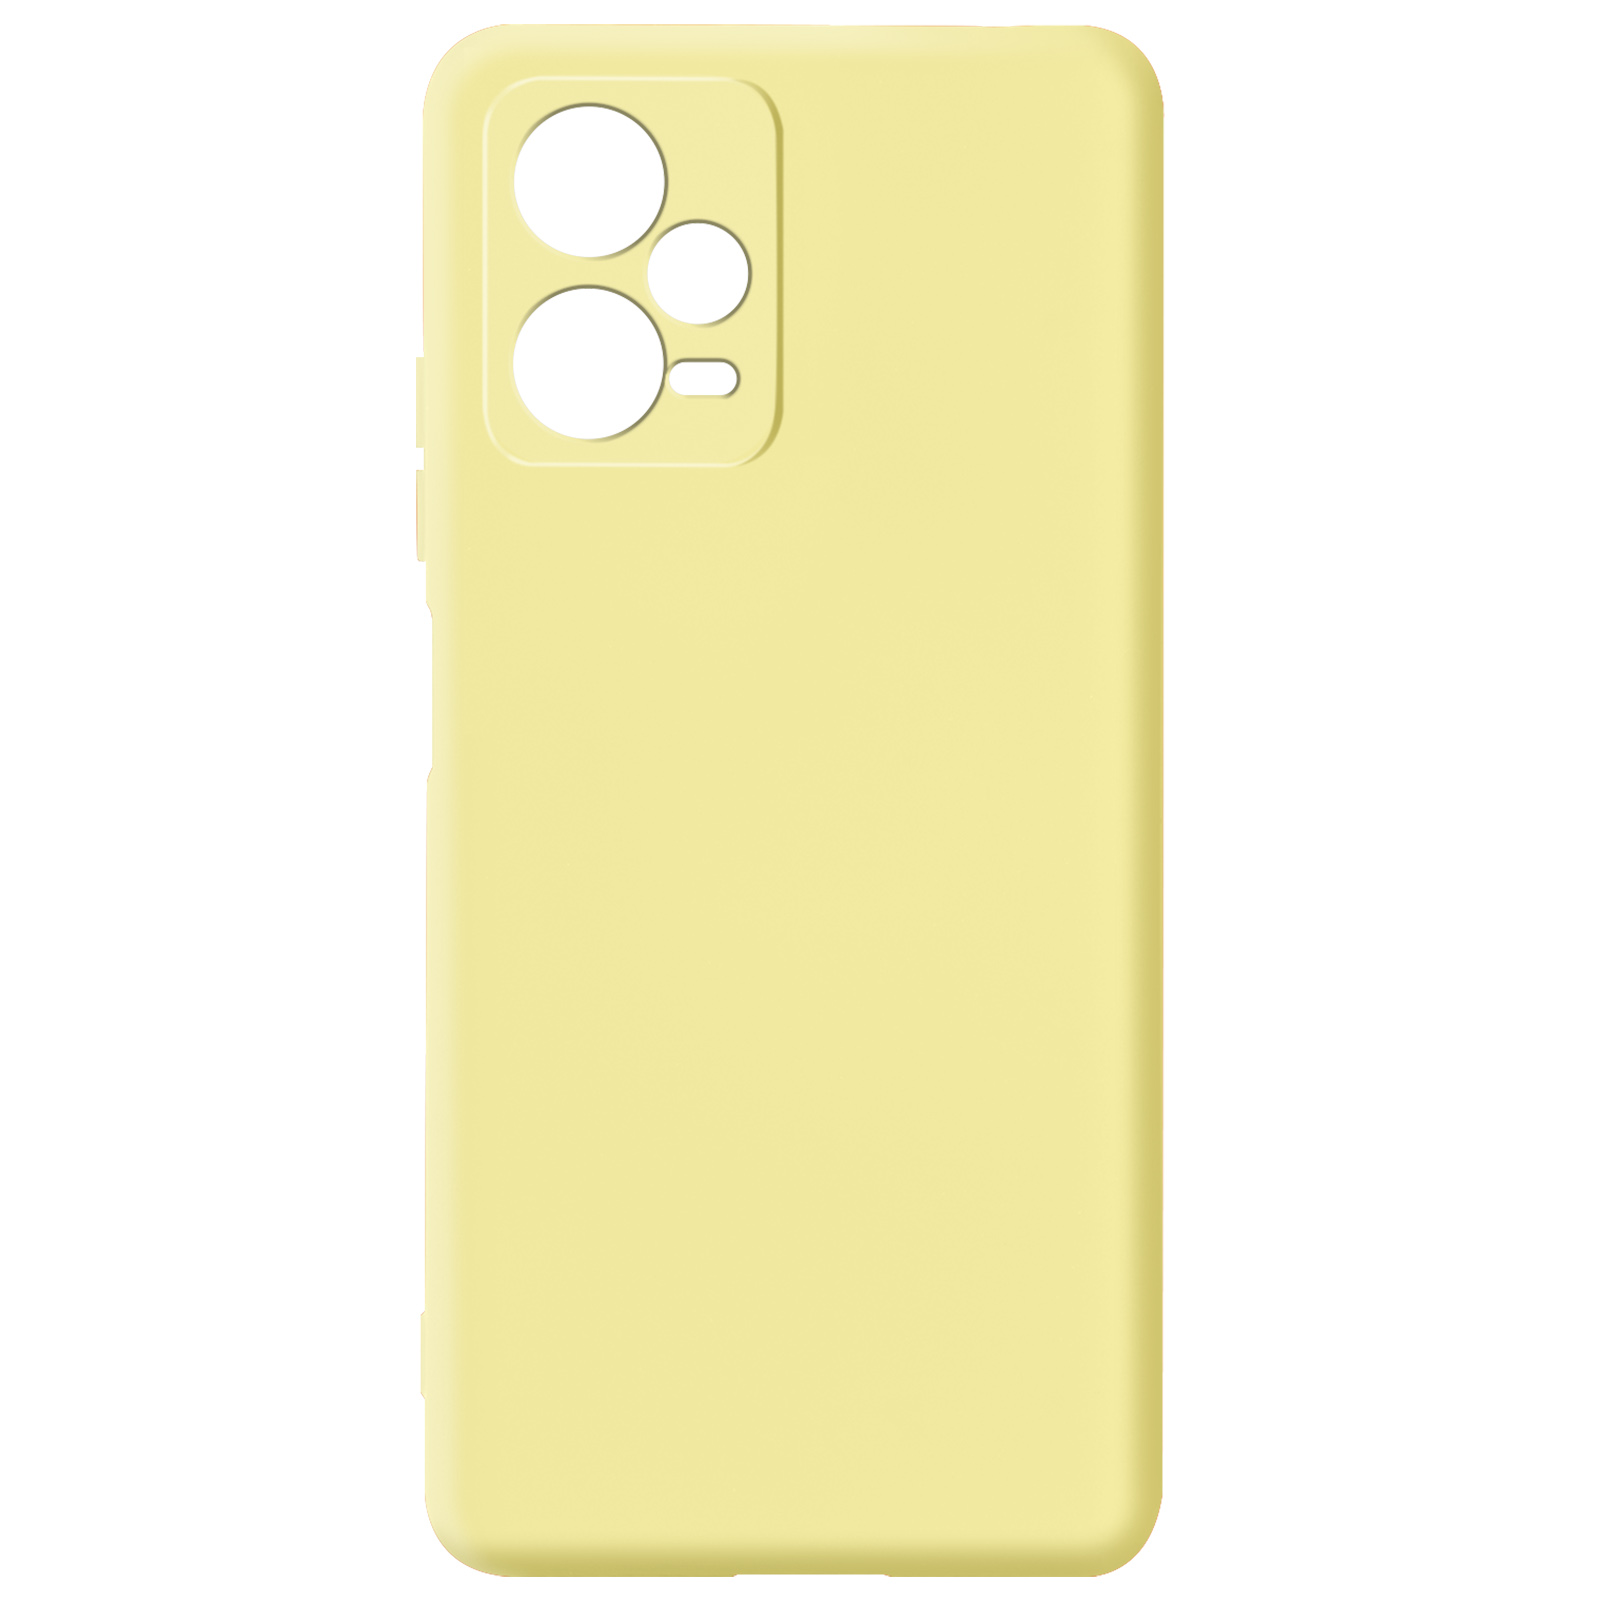 AVIZAR Soft Touch Xiaomi, Note Redmi Series, Gelb 5G, Backcover, 12